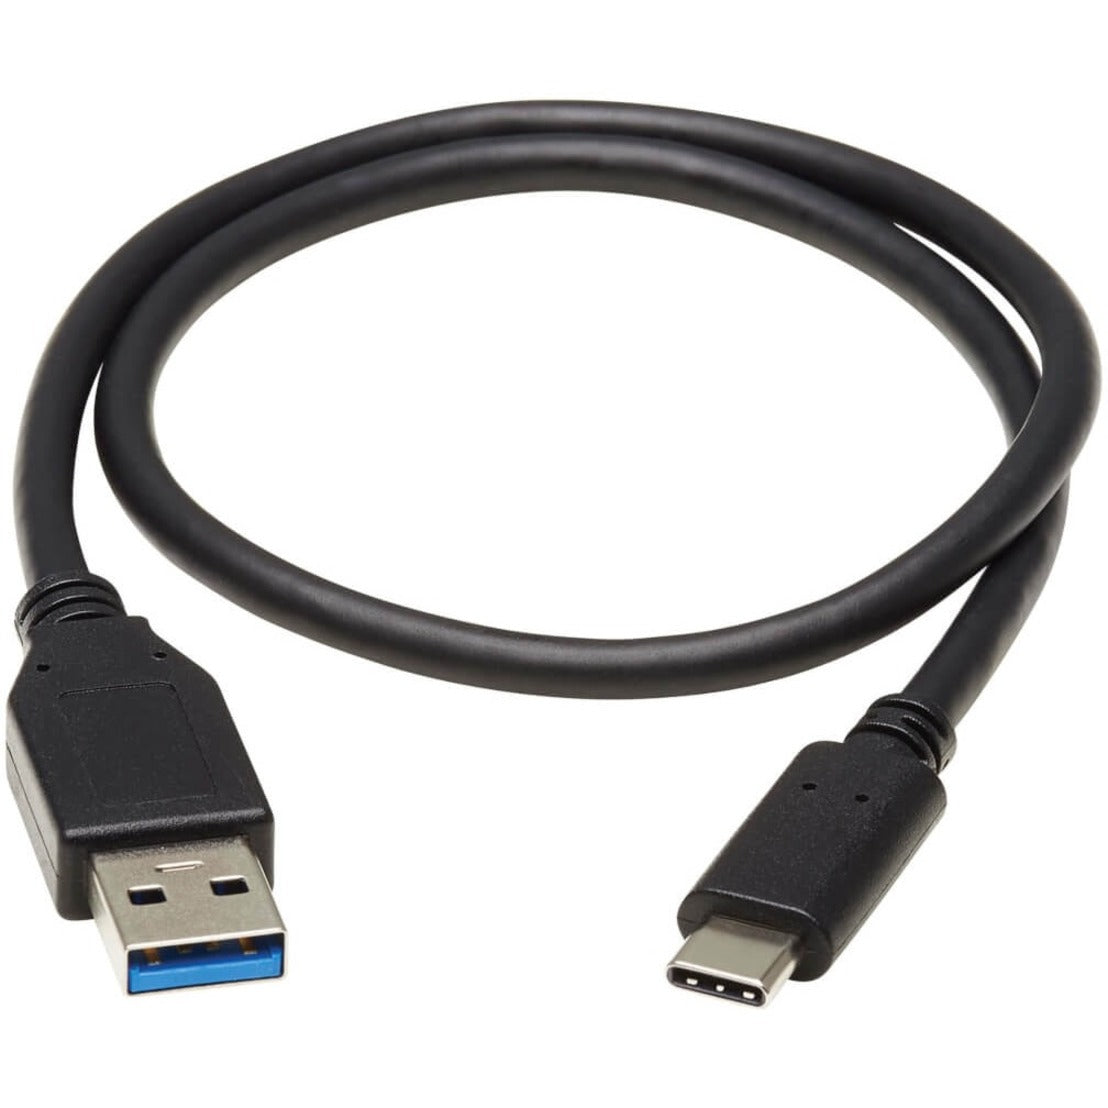 Tripp Lite U428-20N-G2 USB Type-C to USB Type-A Cable, M/M, 20 in., Data Transfer Cable